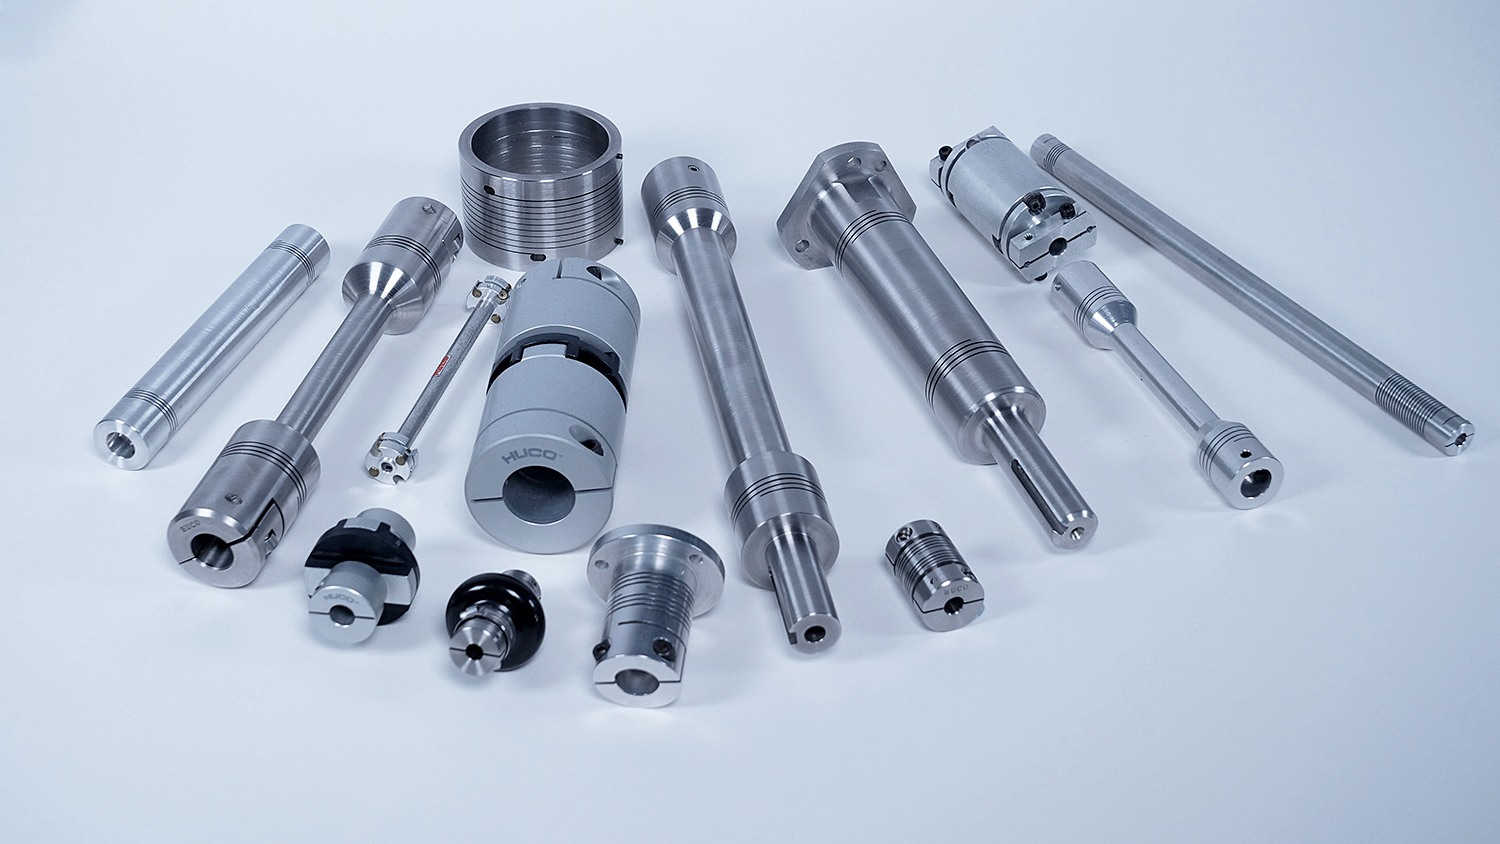 Huco has built a reputation for providing a comprehensive range of standard and customised precision couplings to food and beverage processing machinery OEMs.